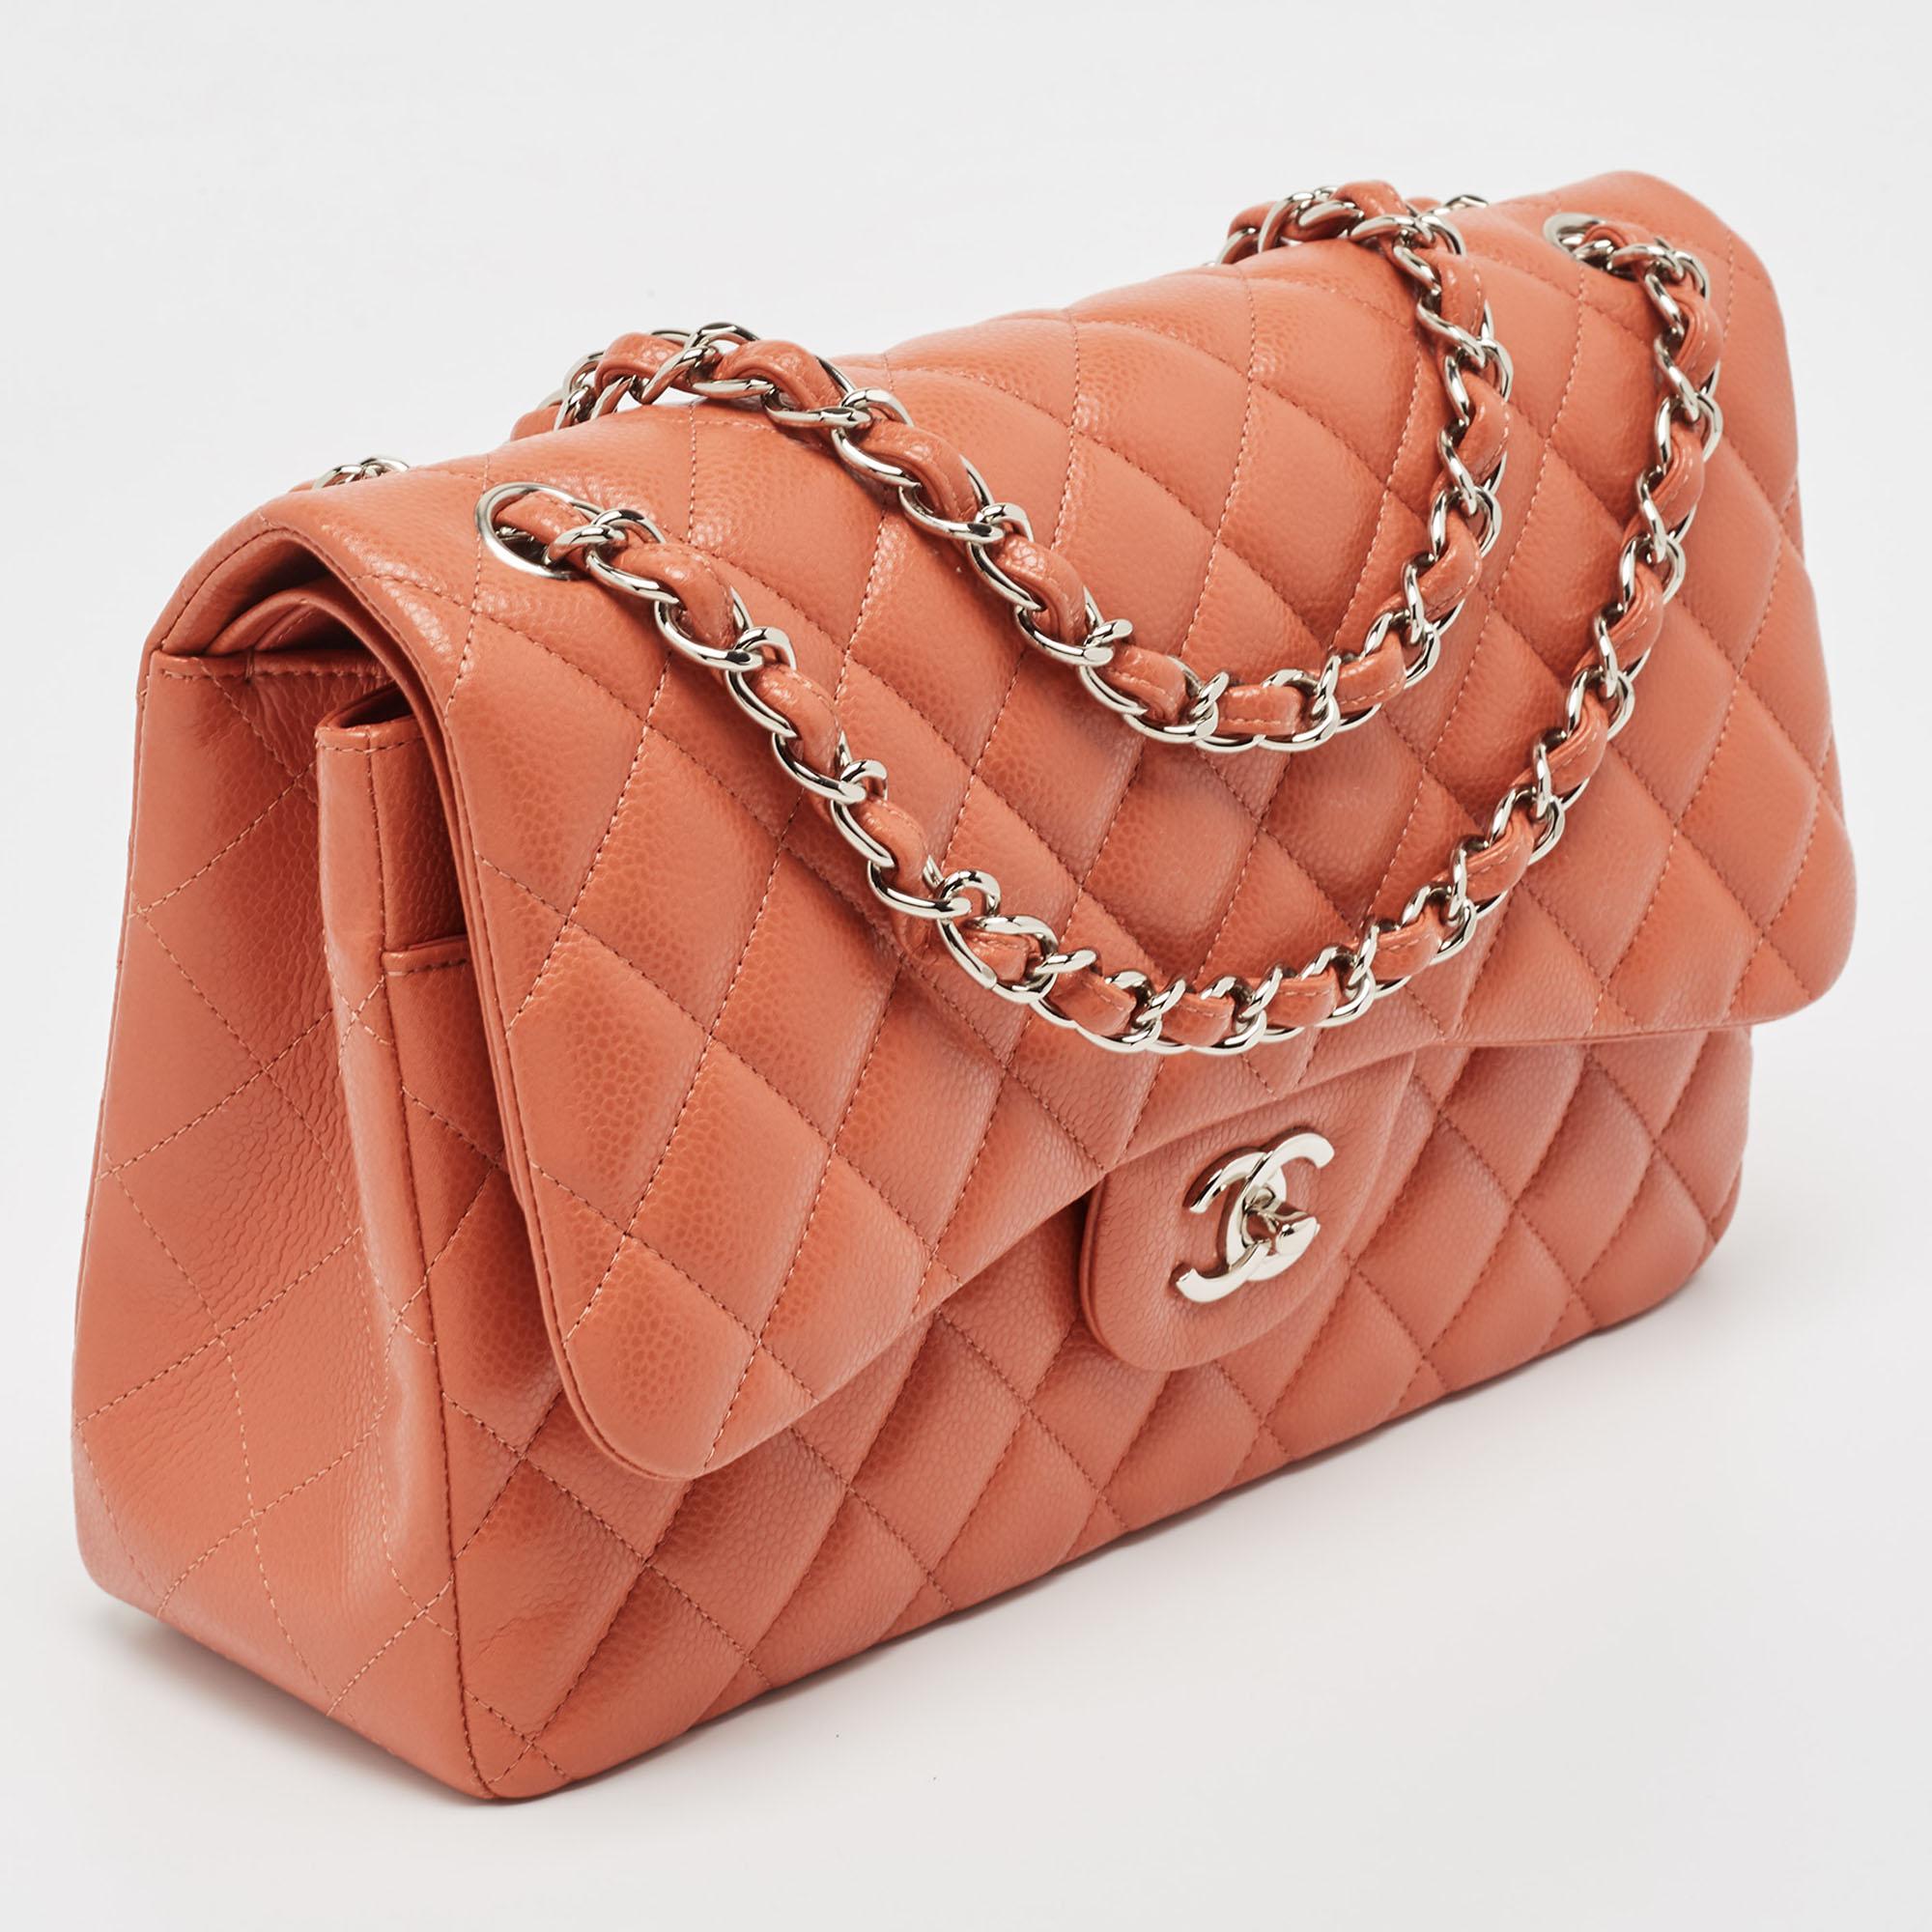 The Chanel Jumbo Classic Double Flap Bag exudes timeless elegance. Crafted from luxurious caviar leather, its quilted pattern adds texture. The spacious double flap design and silver-tone hardware complement the rich brick brown hue, creating a